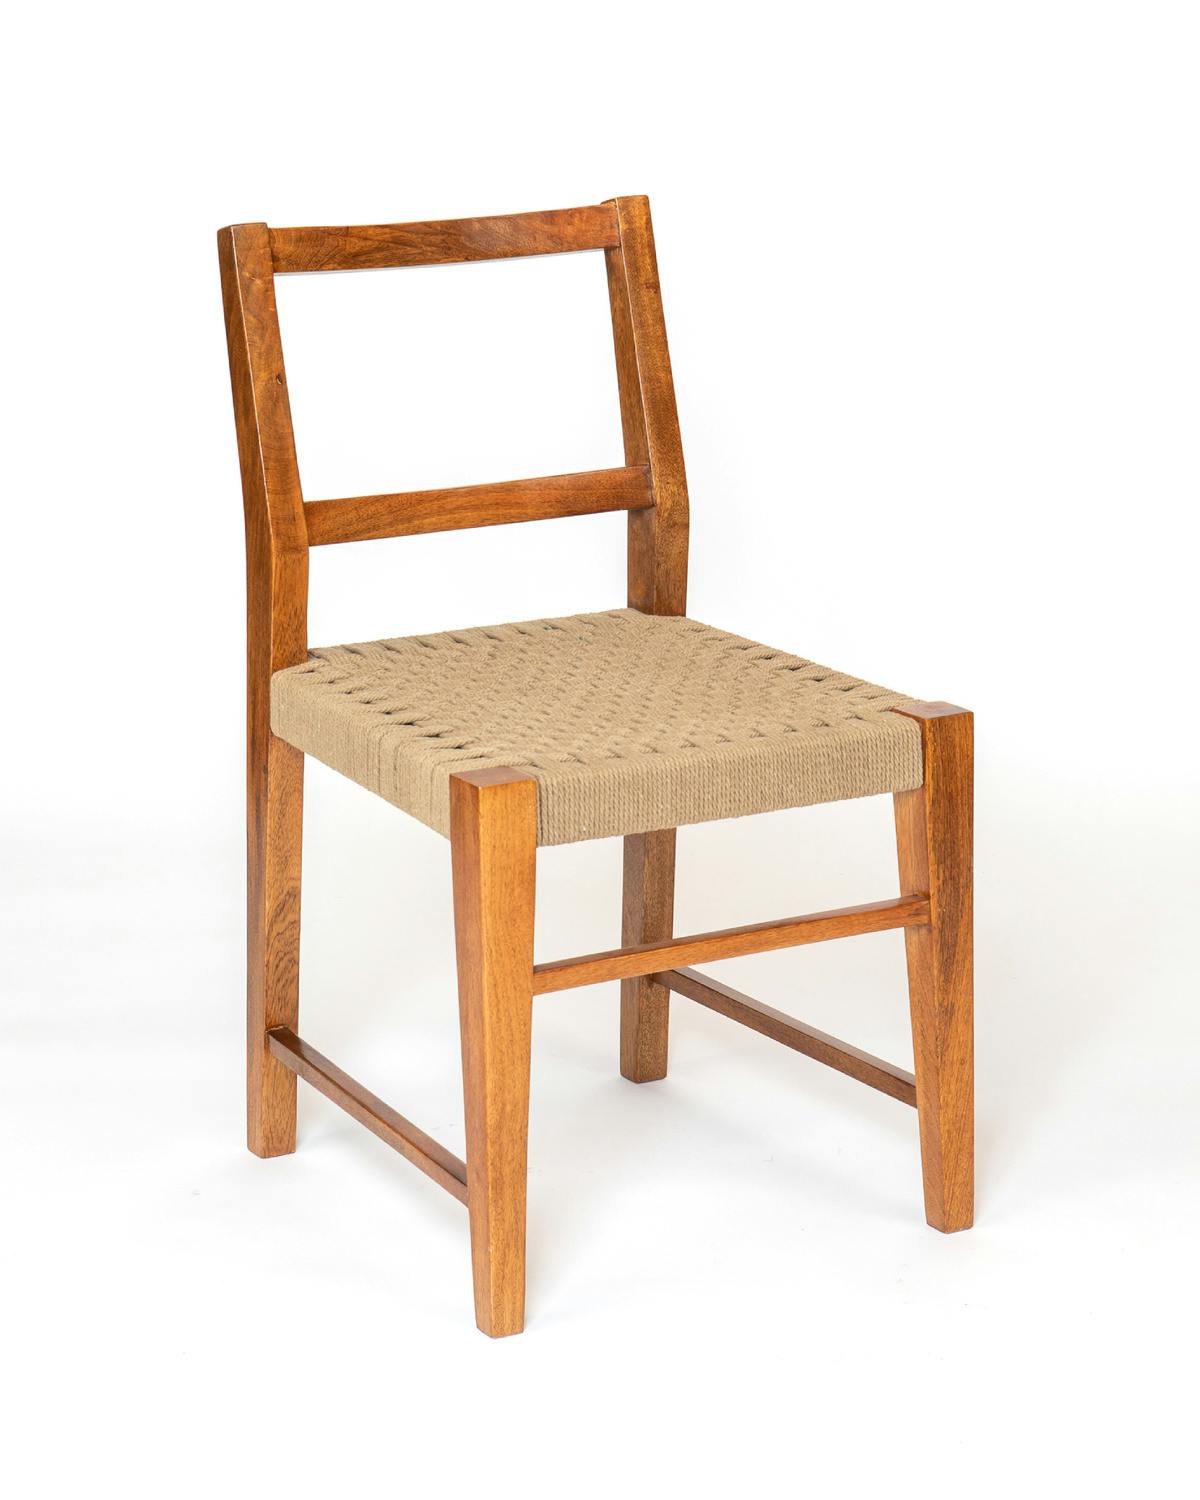 Chair With Rattan Seat (In store exclusive), Honey. Image #1